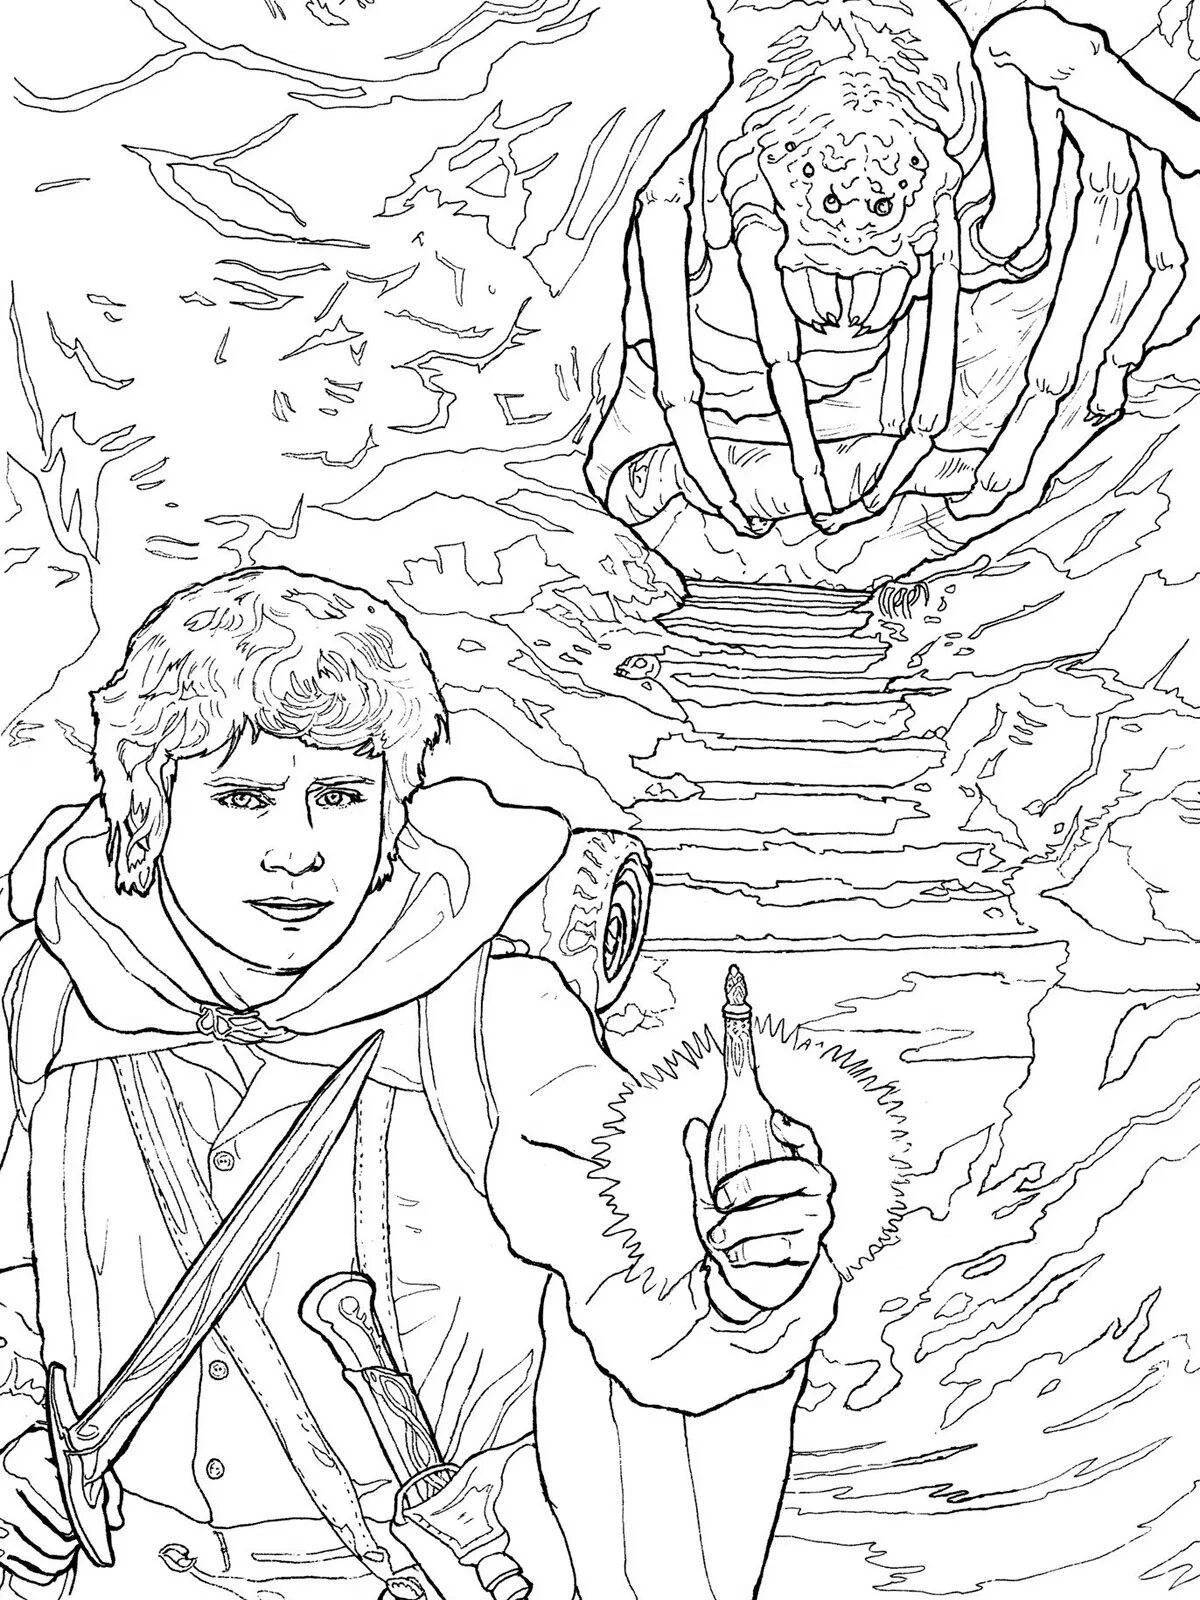 Tolkien's wonderful world coloring page